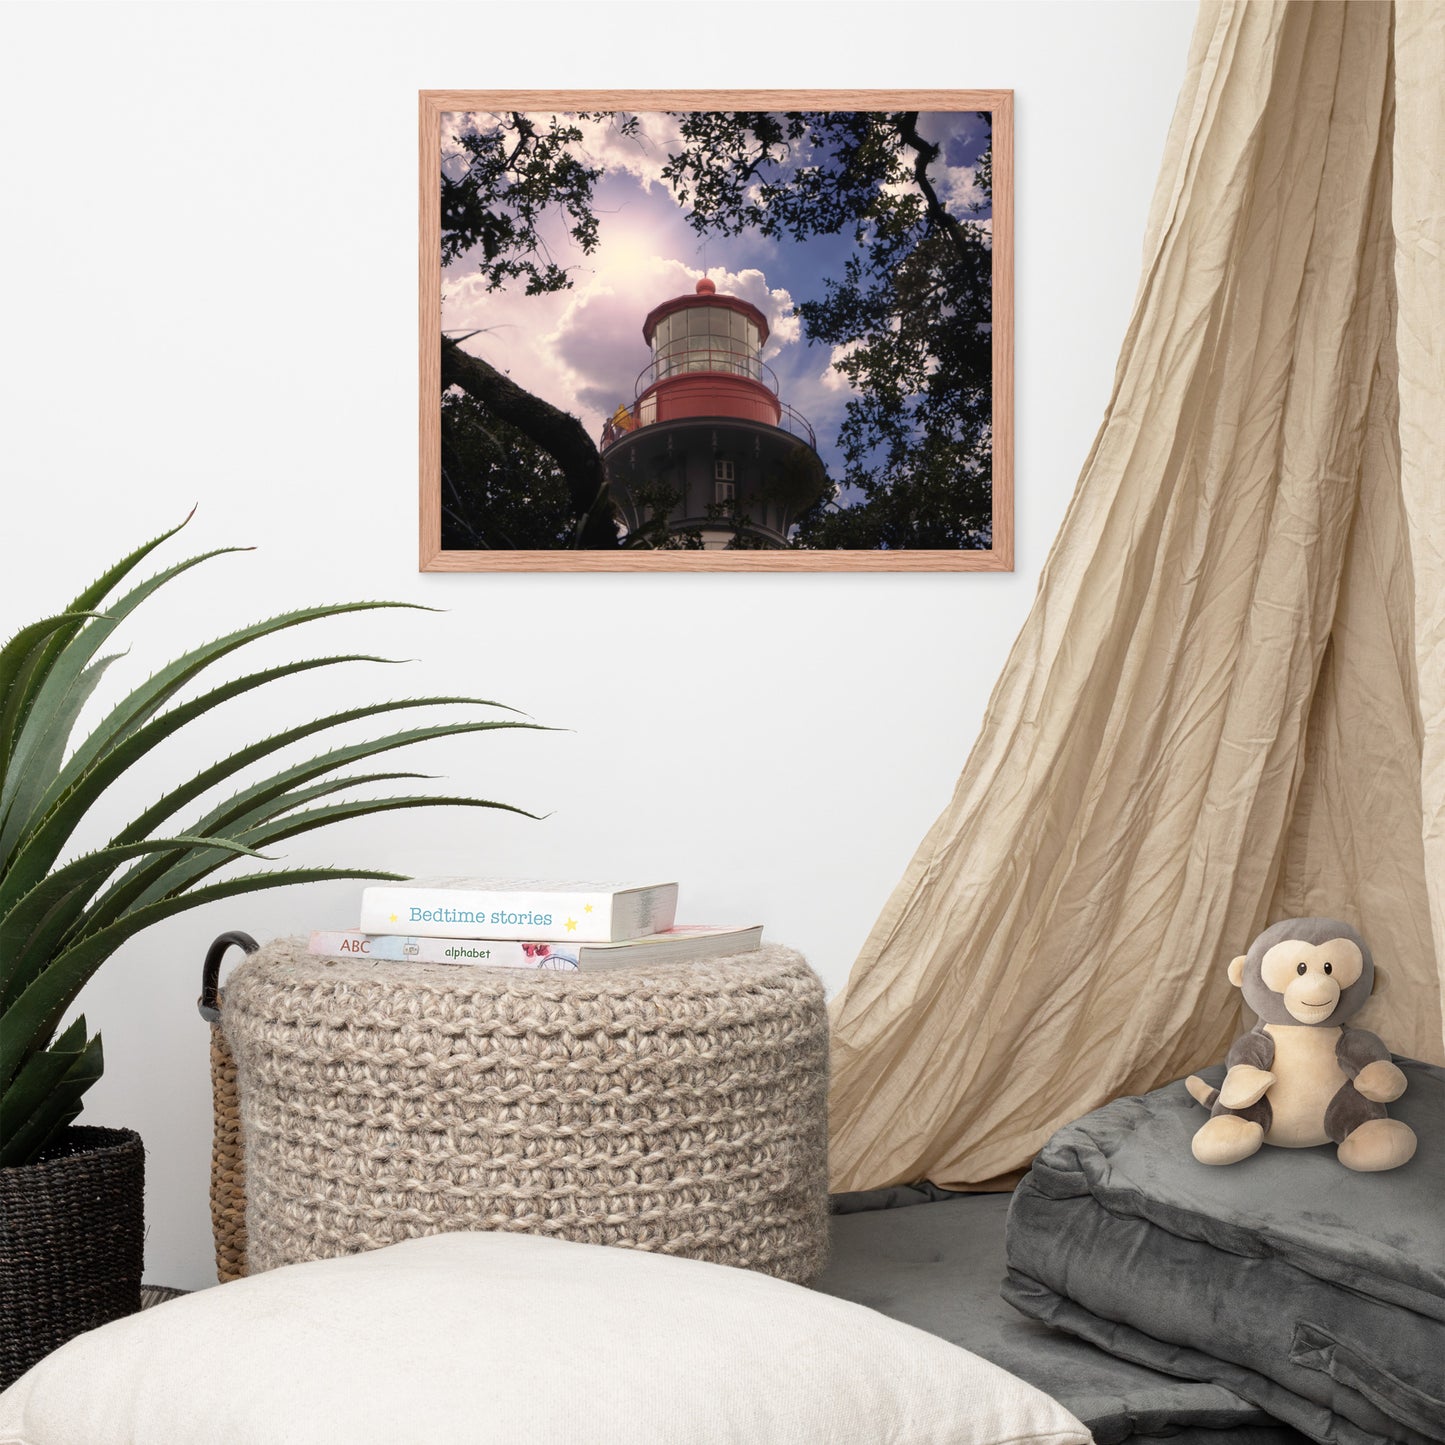 St Augustine Lighthouse and Tree Branches Urban Building Photograph Framed Wall Art Prints